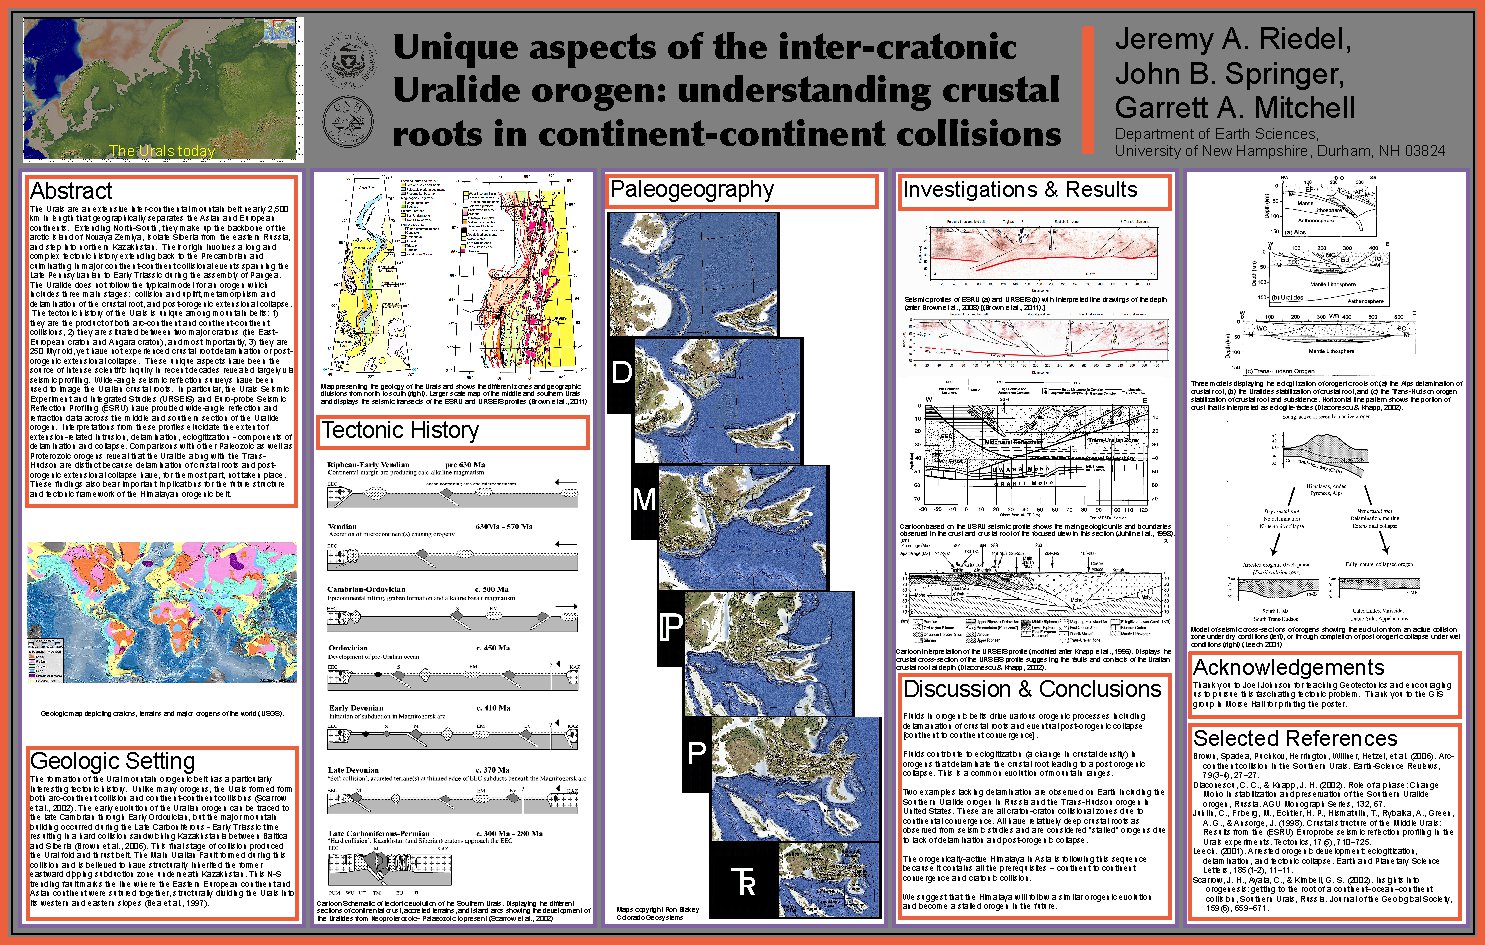 Unique Aspects Of The Inter-Cratonic Uralide Orogen: Understanding Crustal Roots In Continent-Continent Collisions by joeljohnson